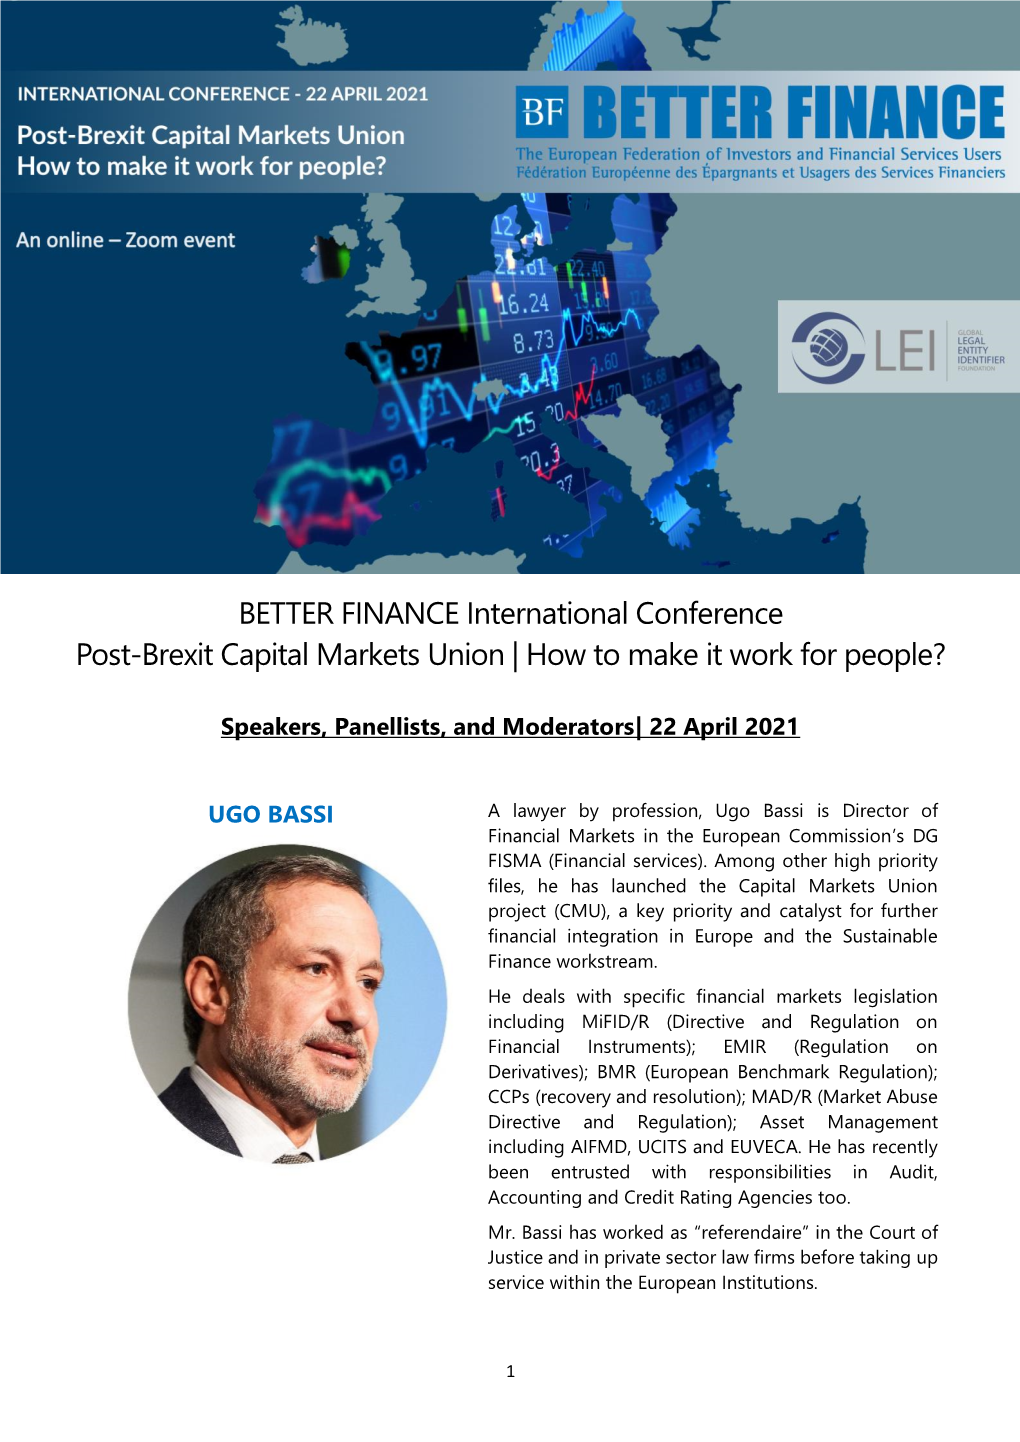 BETTER FINANCE International Conference Post-Brexit Capital Markets Union | How to Make It Work for People?